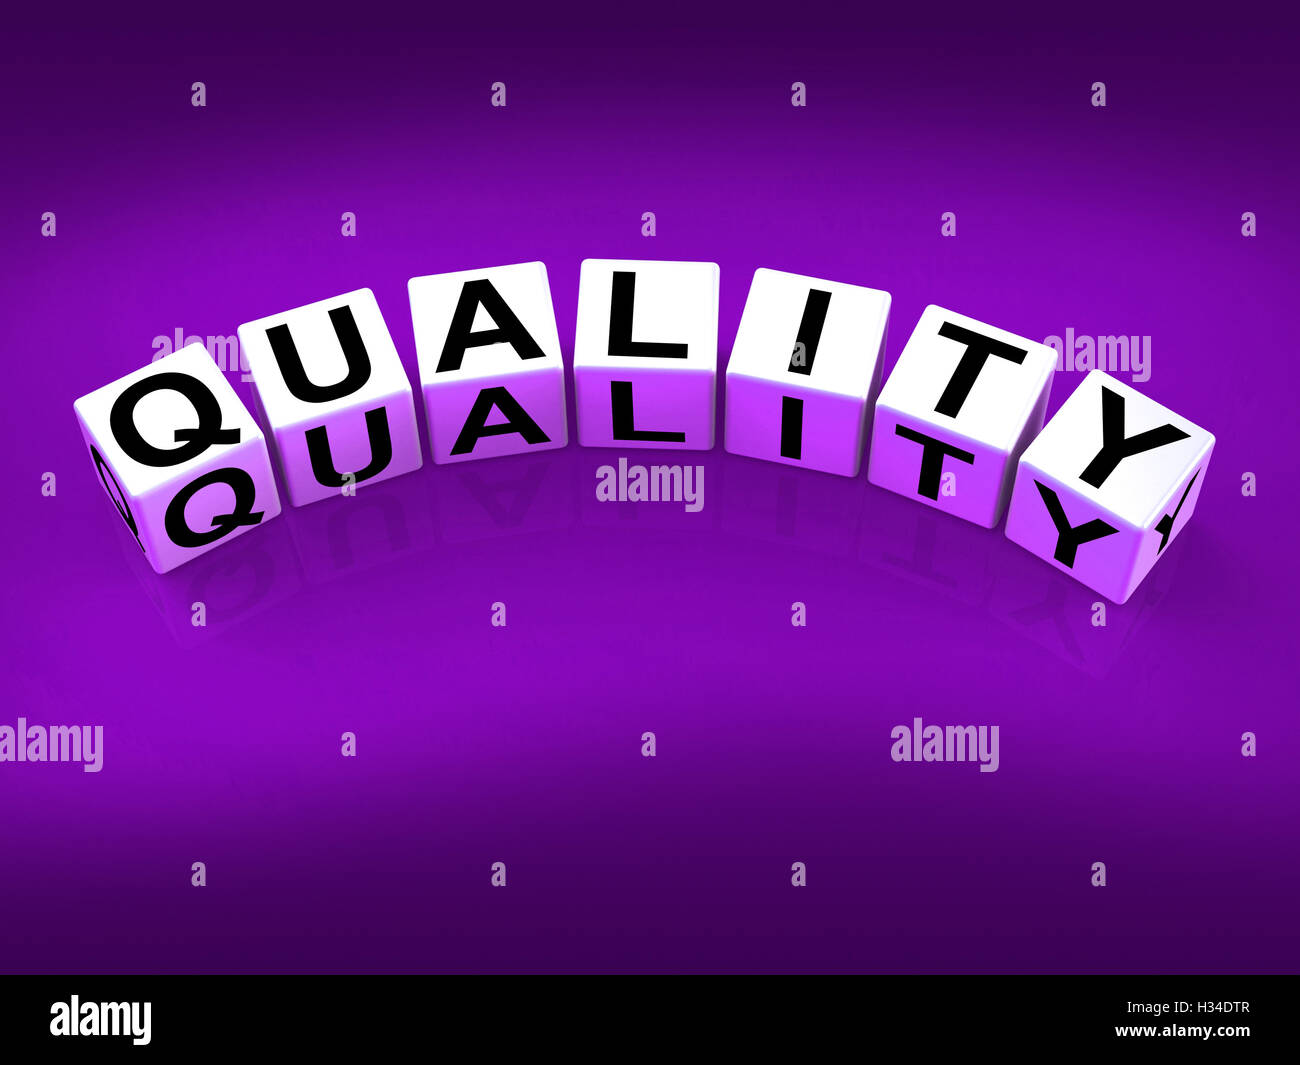 Quality Blocks Mean Qualities Traits and Aspects Stock Photo